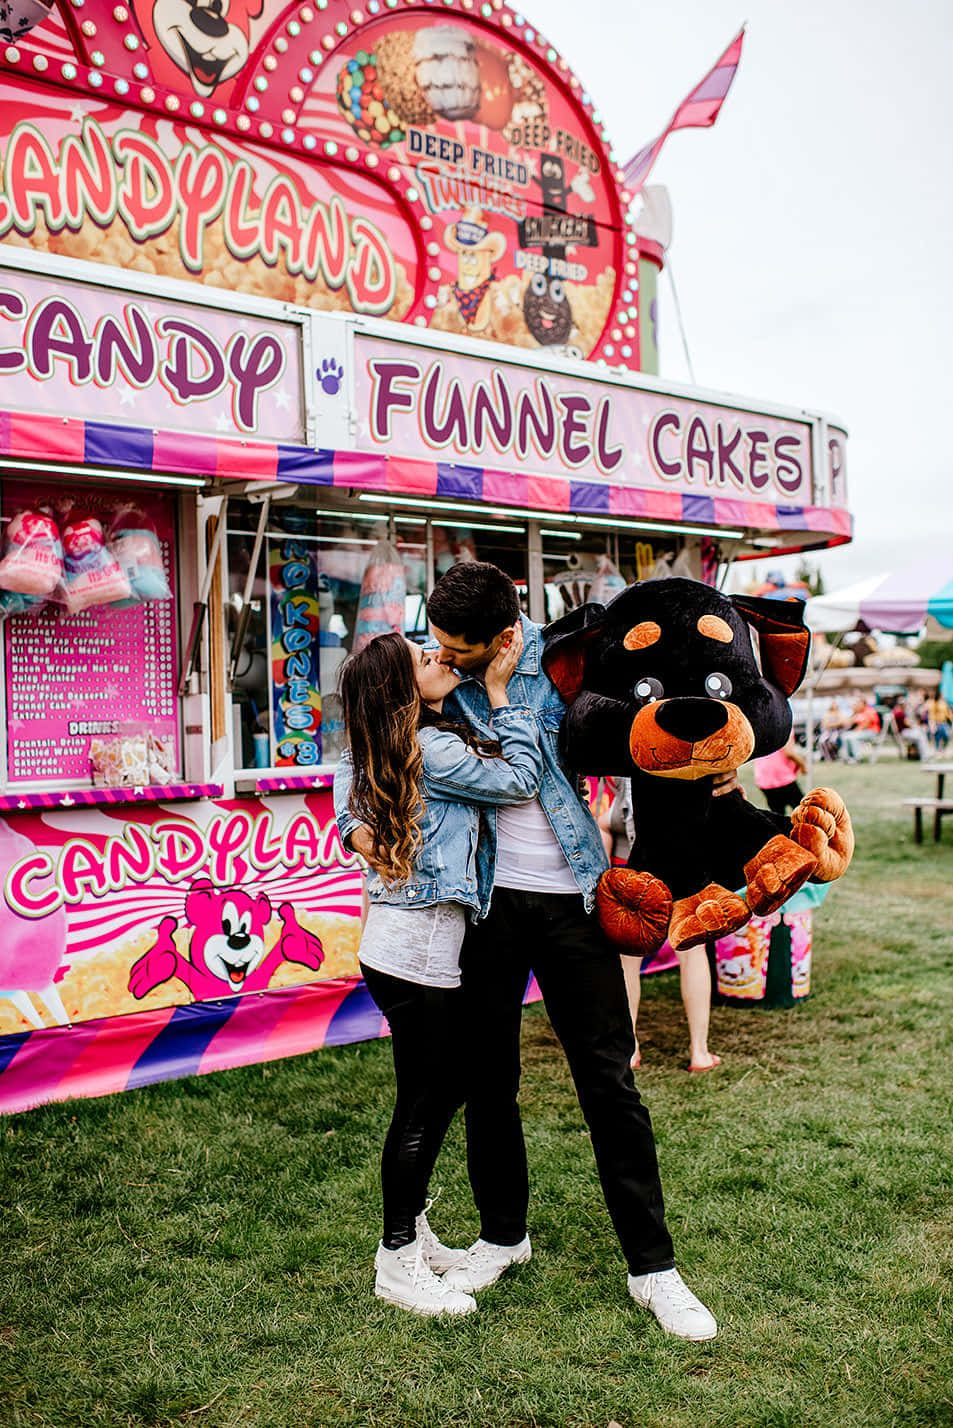 Couple Kissing At Carnival Booth Picture